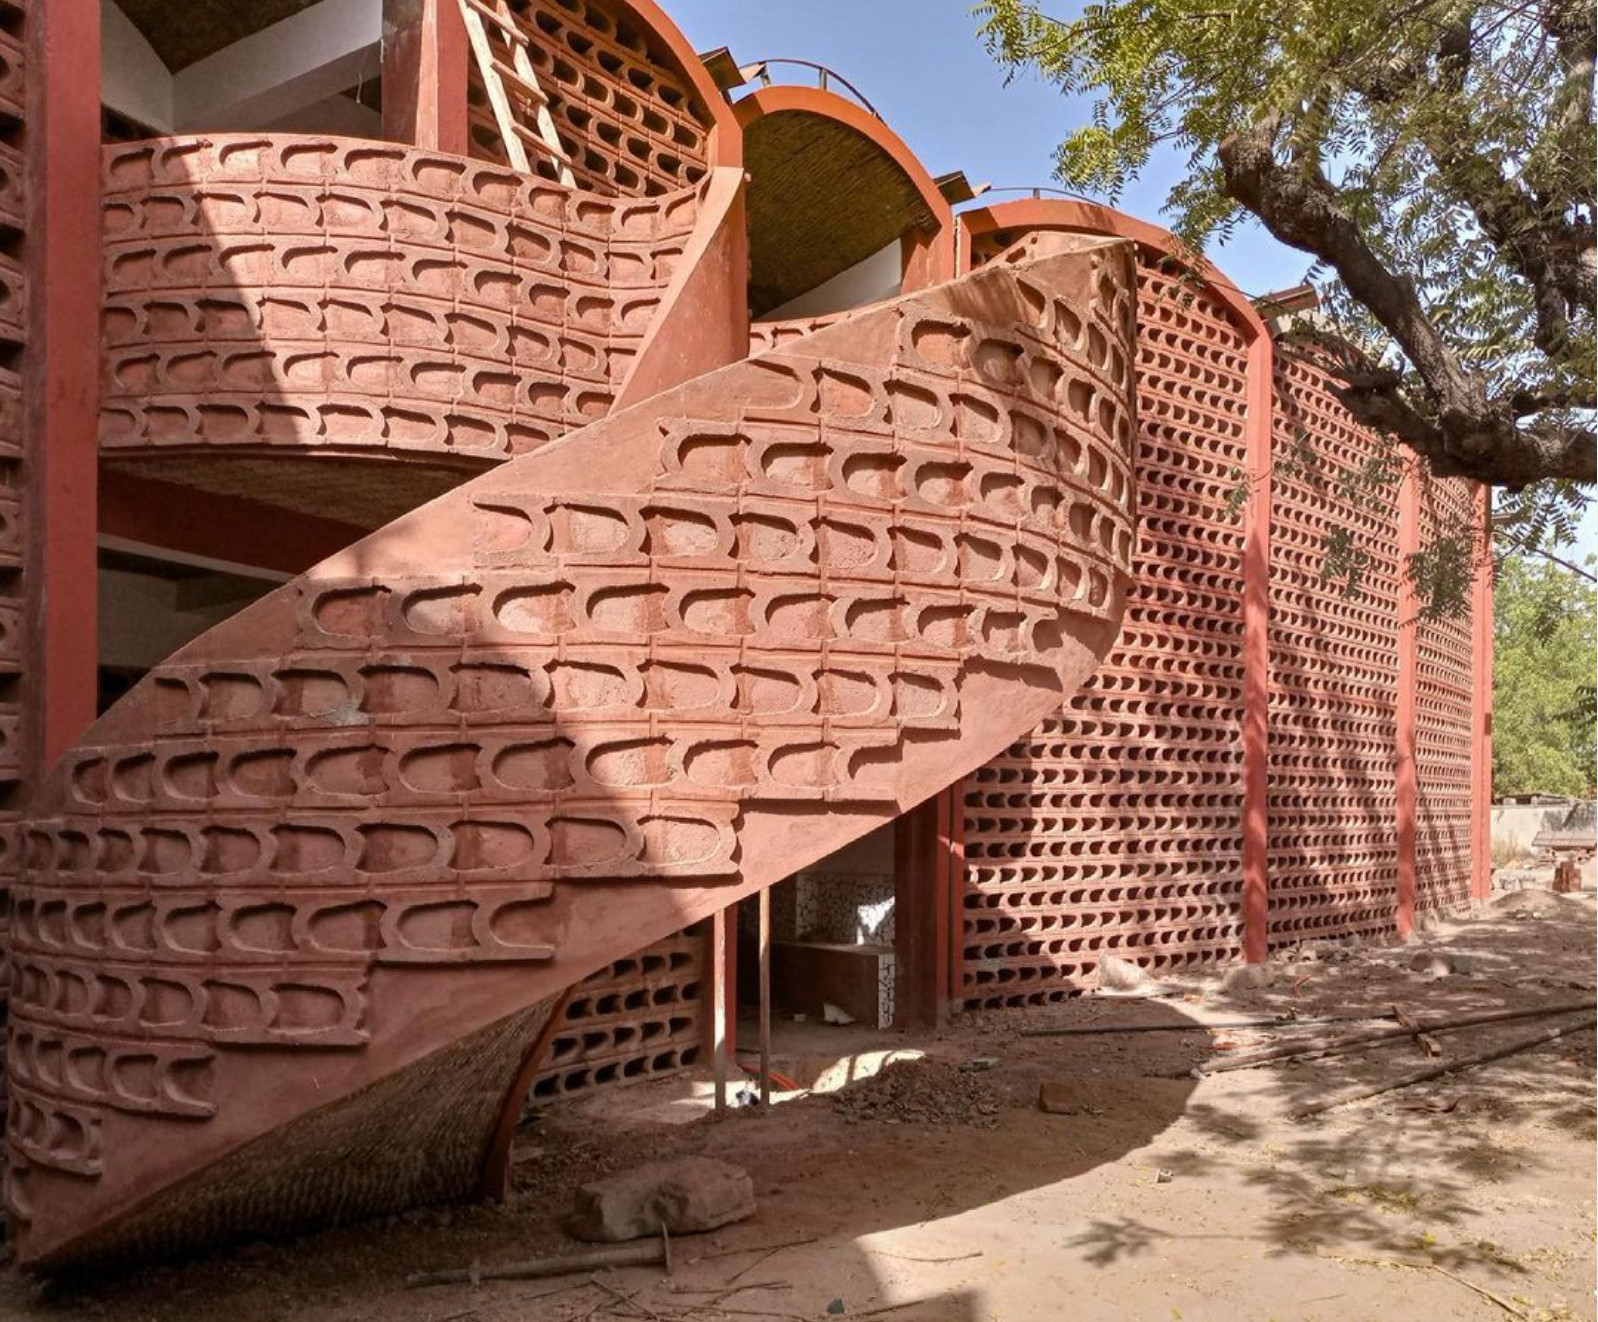 The Tambacounda Hospital Paediatric and Maternity Clinic, Senegal by Manuel Herz. All images courtesy of the architect